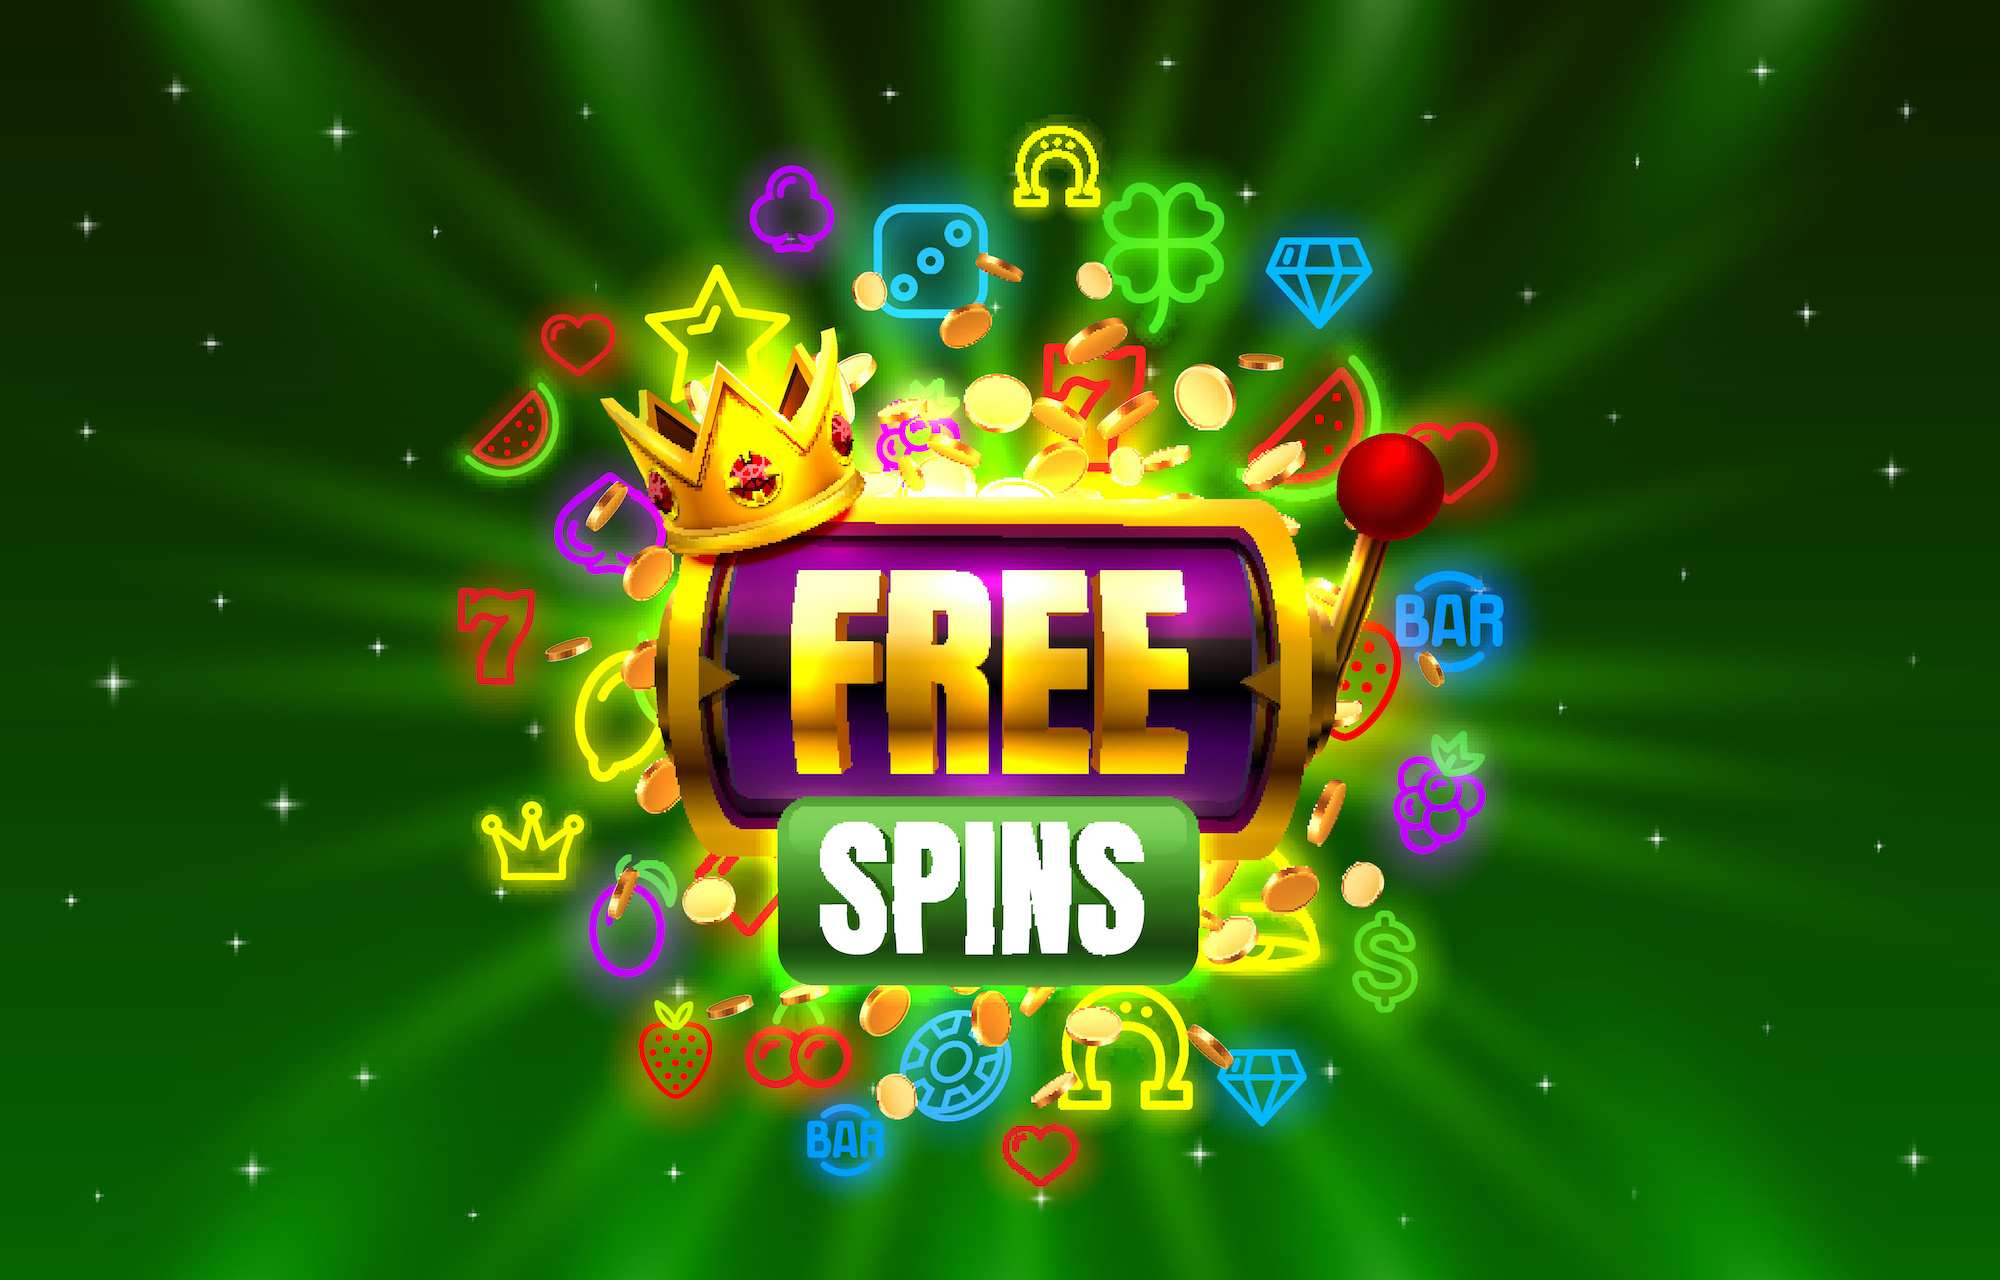 Get your free spins playing Gold Rush Gus online at Joe Fortune